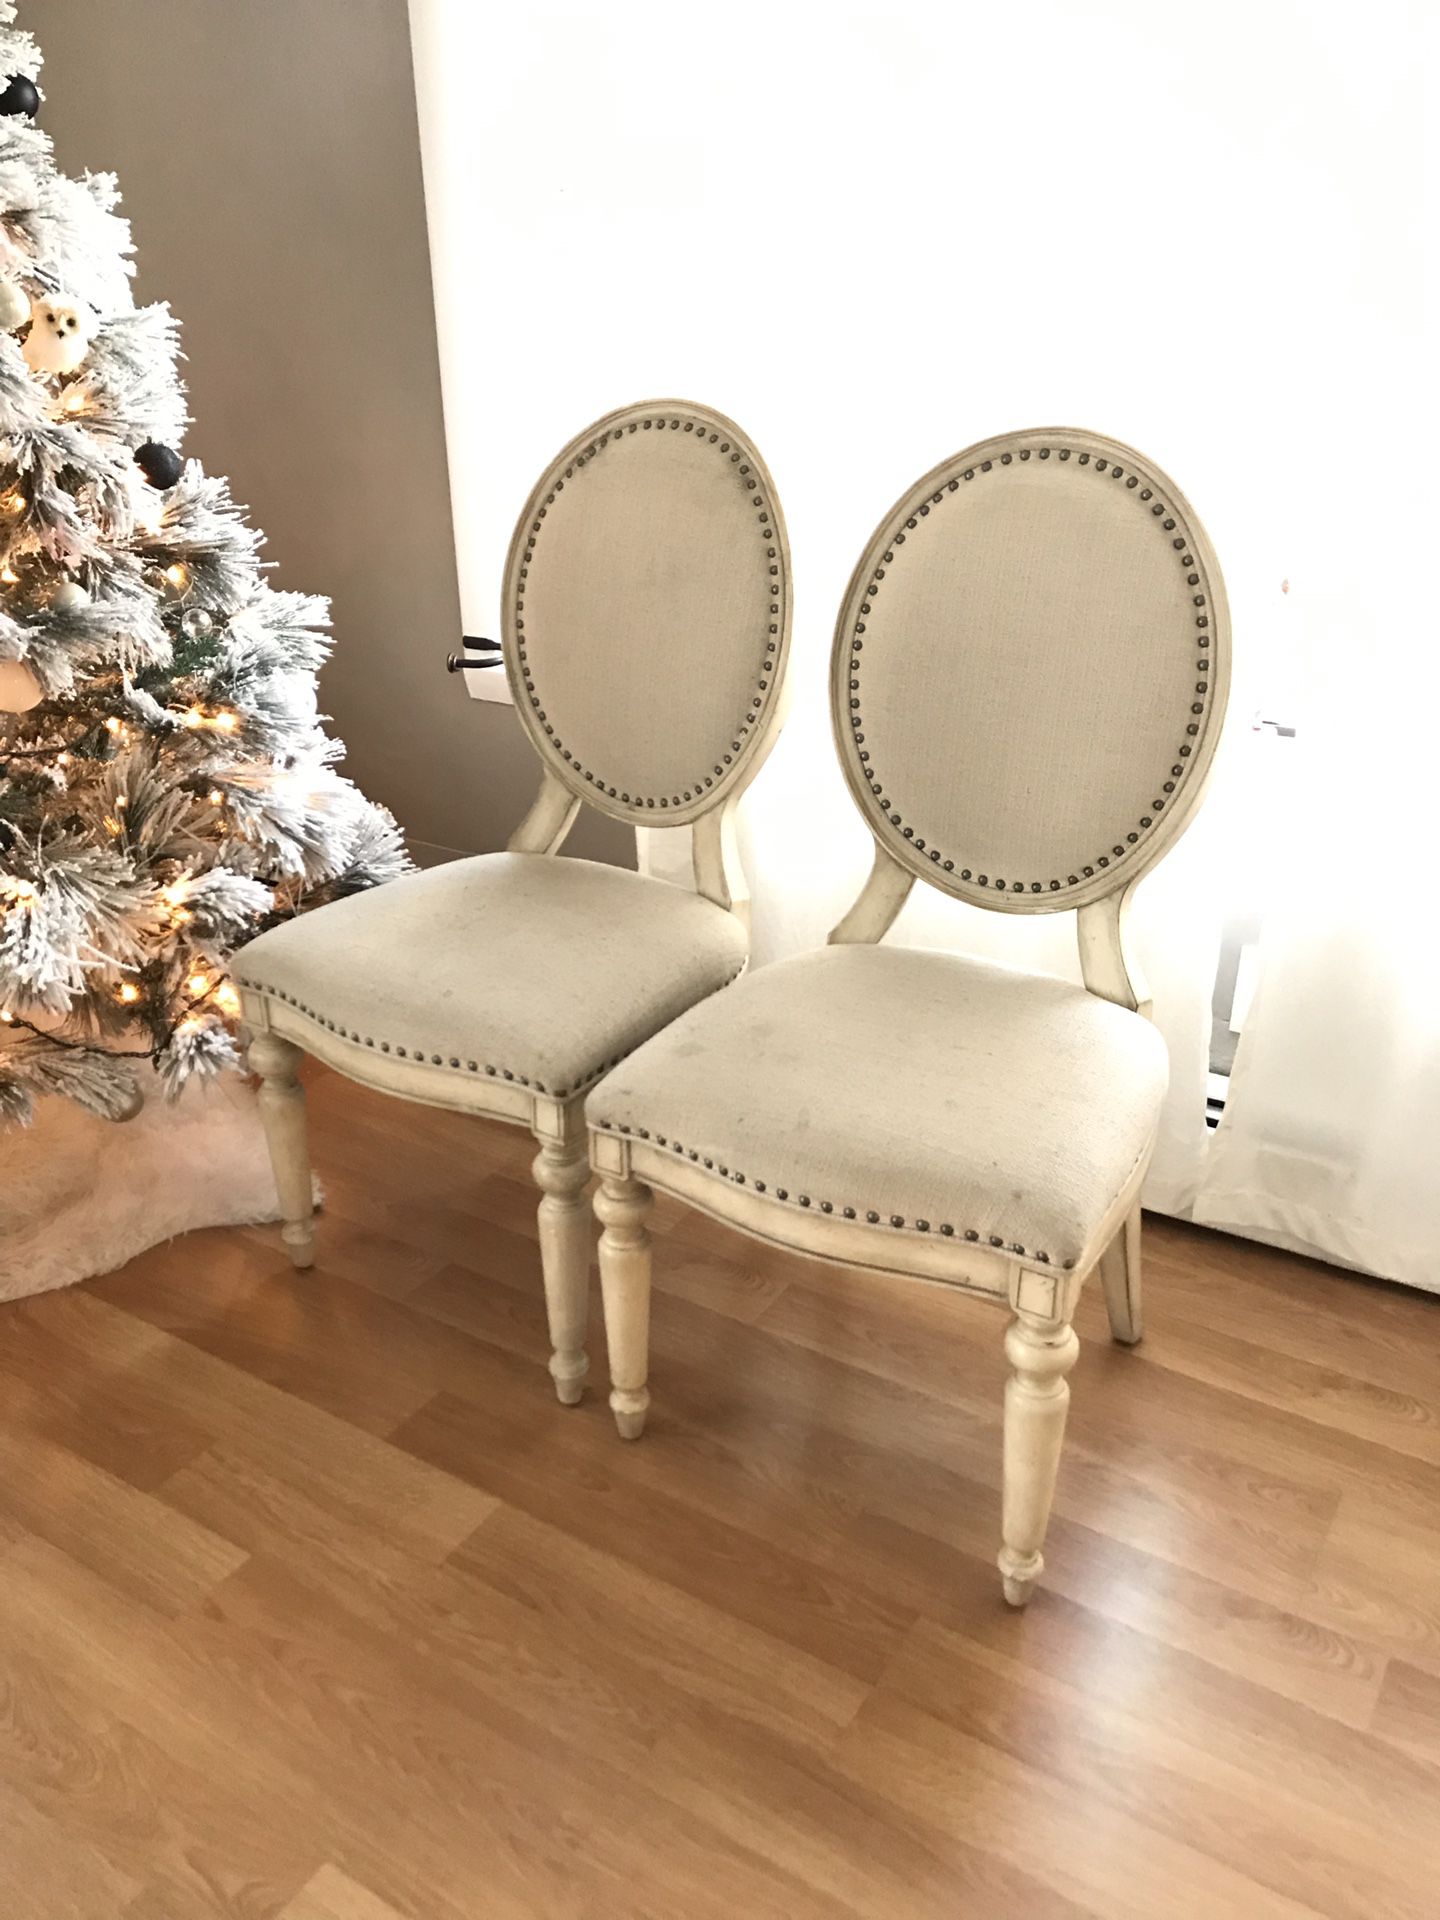 Two Beautiful Vintage Chairs nicely padded made of real wood quality